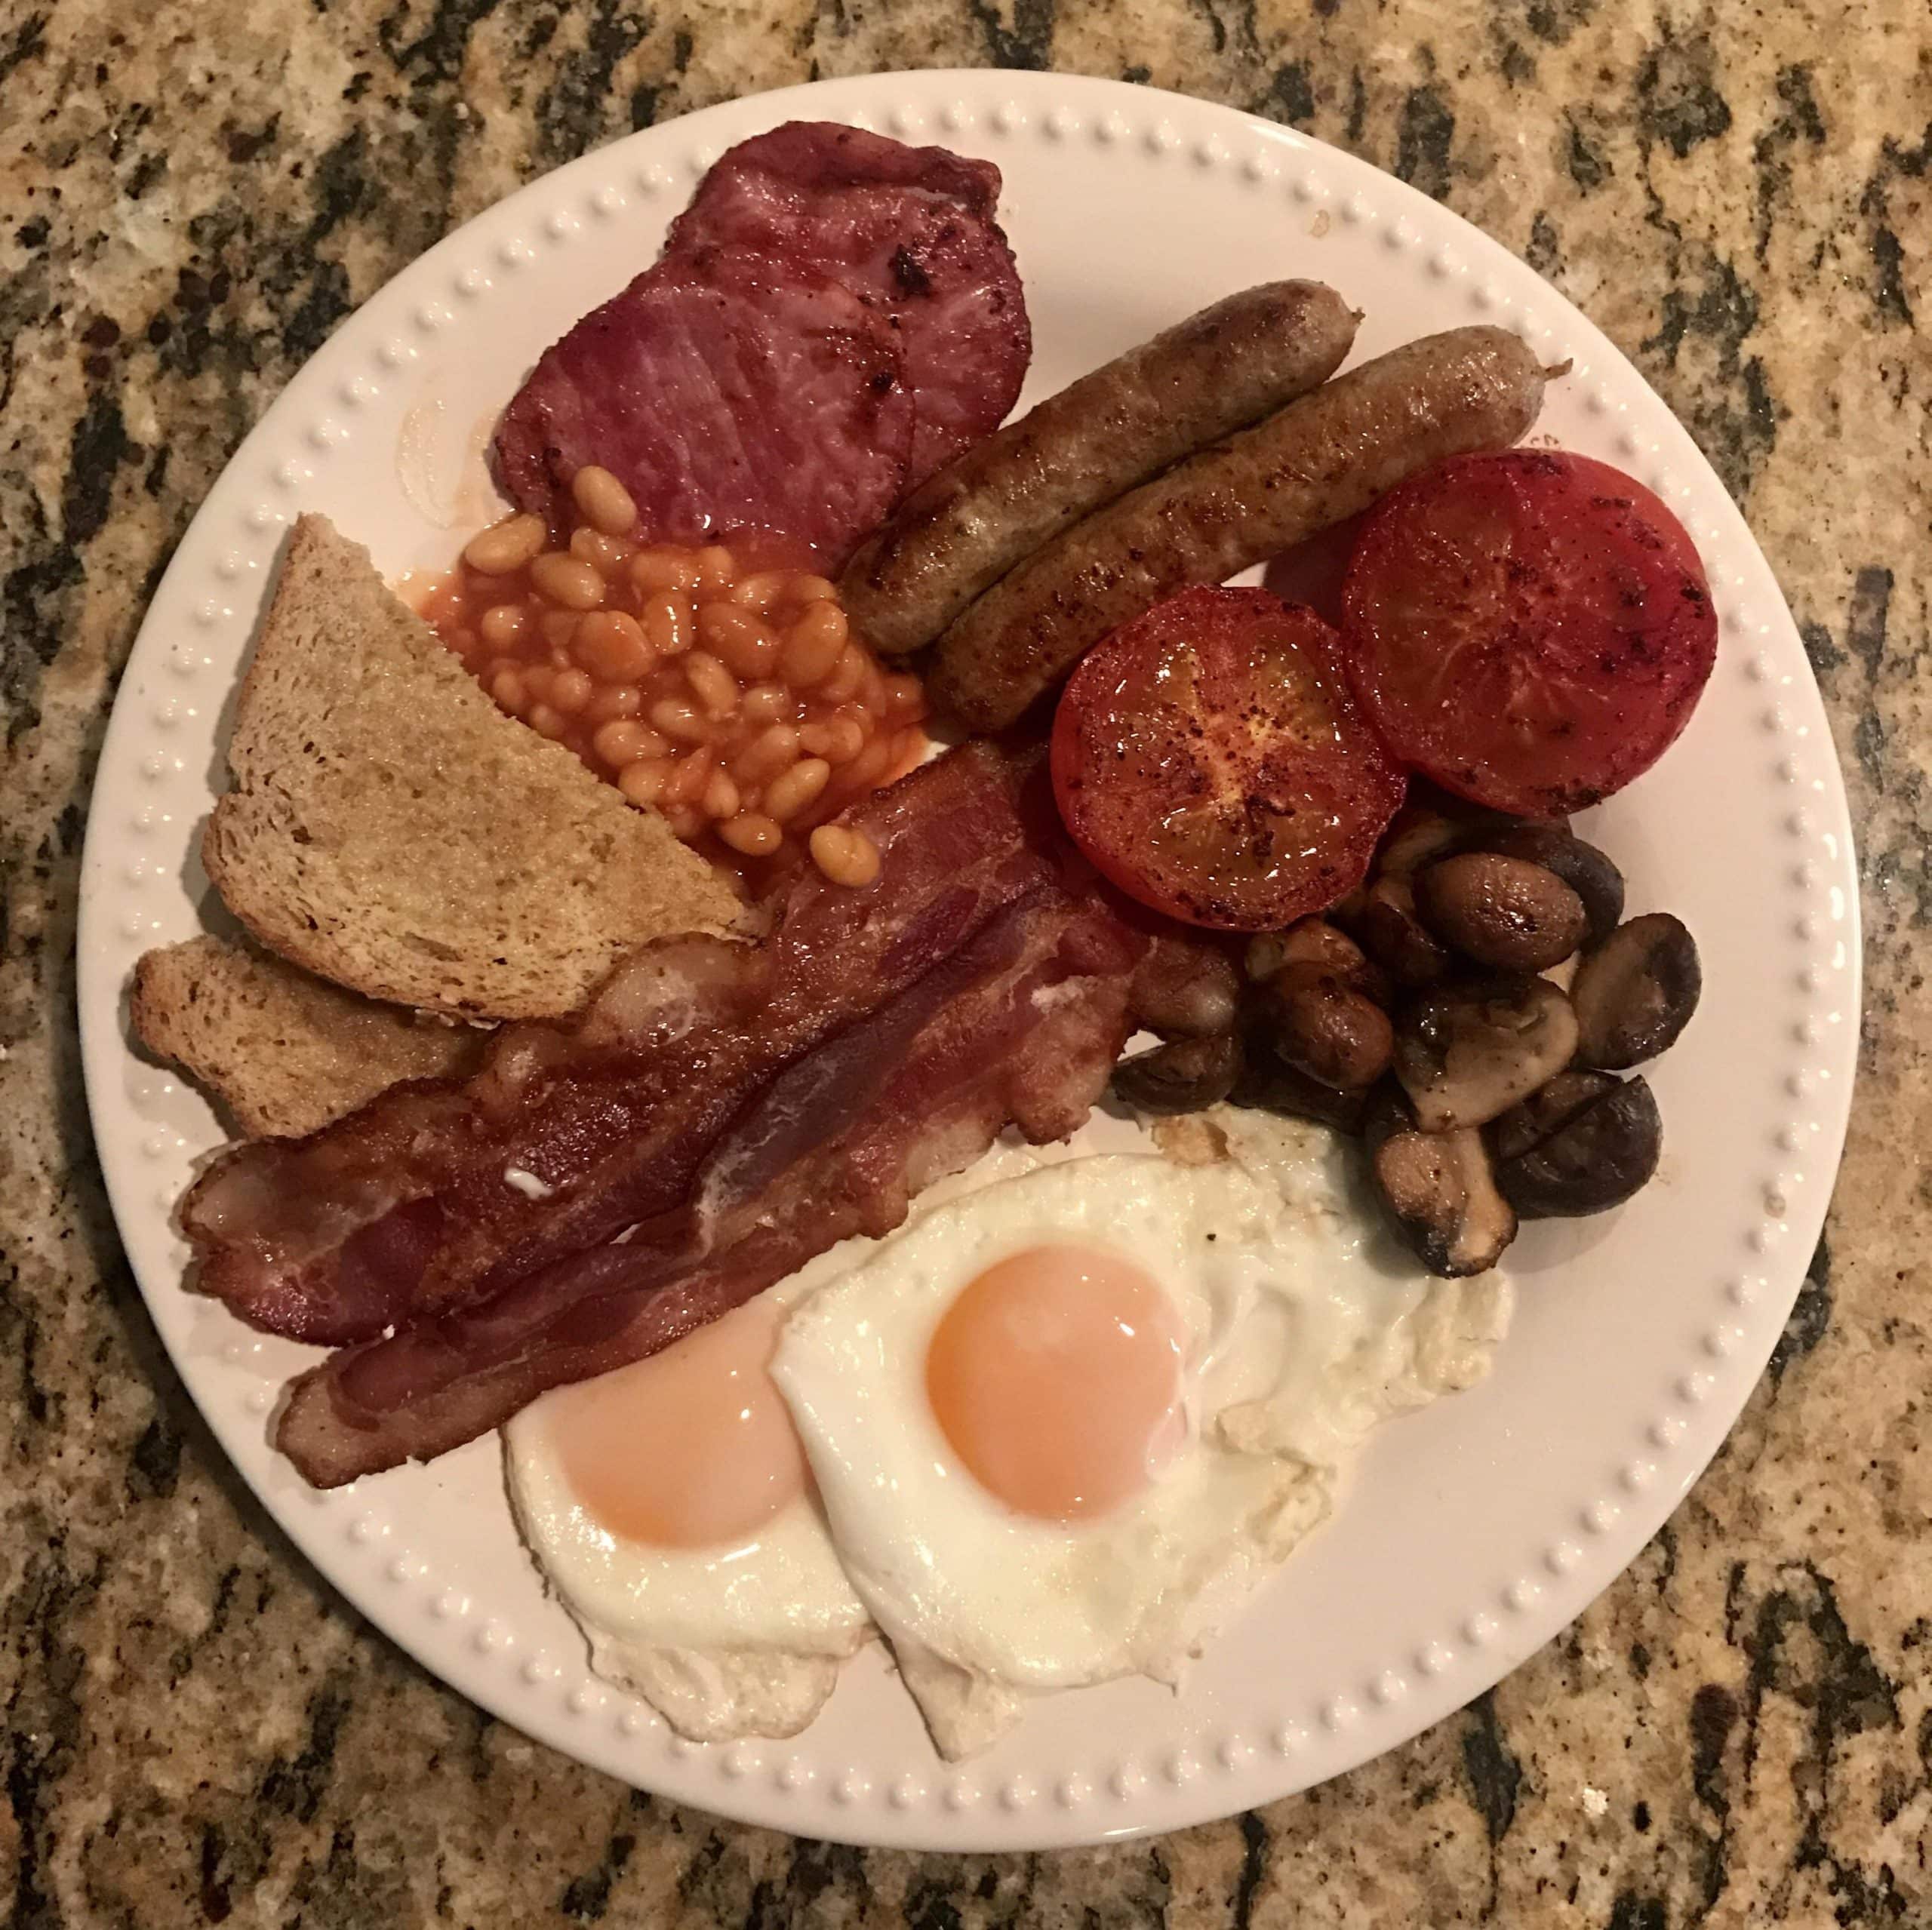 I made a full English breakfast to surprise my wife on her birthday ...